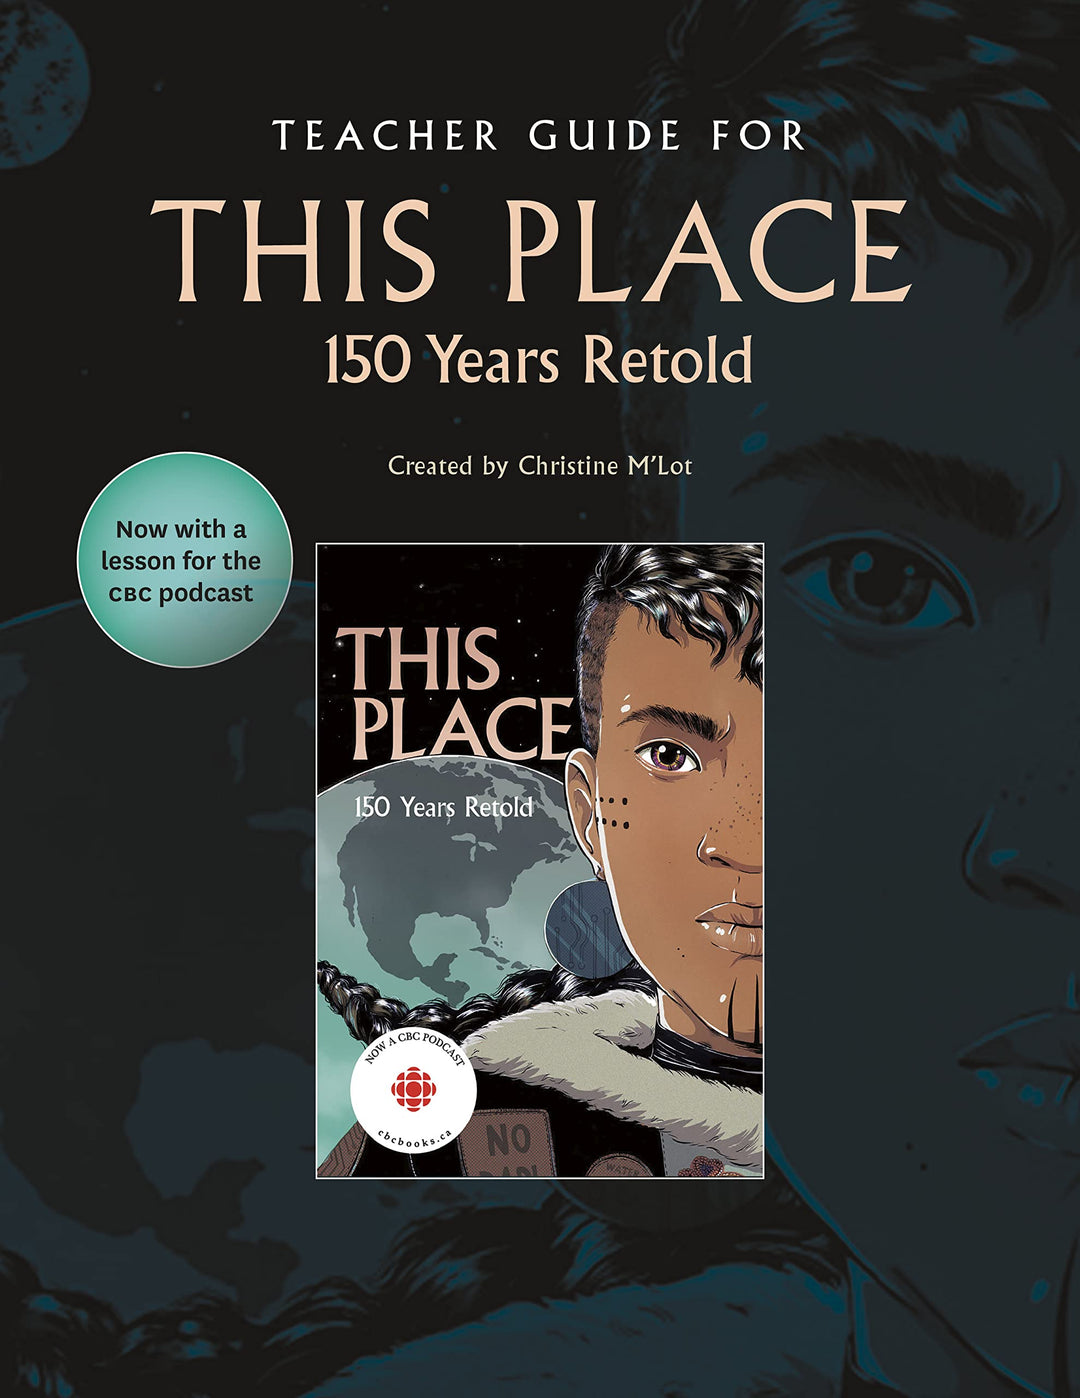 Teacher Guide for This Place: 150 Years Retold by Christine M'Lot